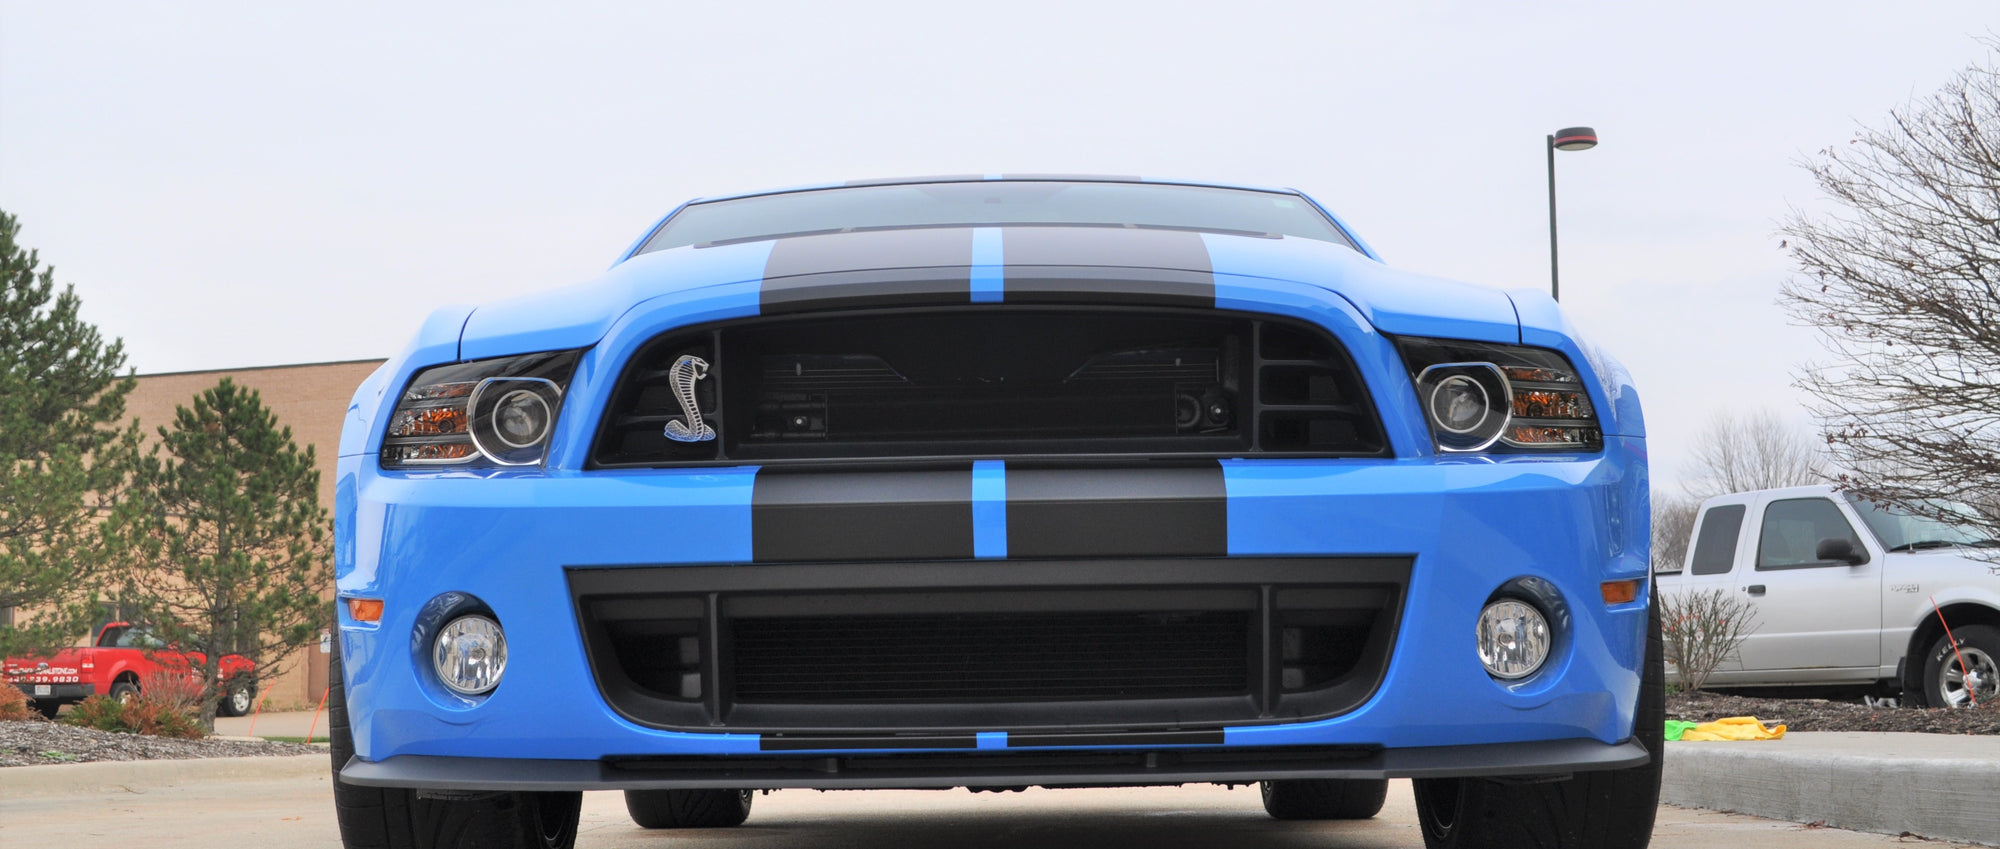 2012 Ford Mustang Shelby GT500 5.8L V8